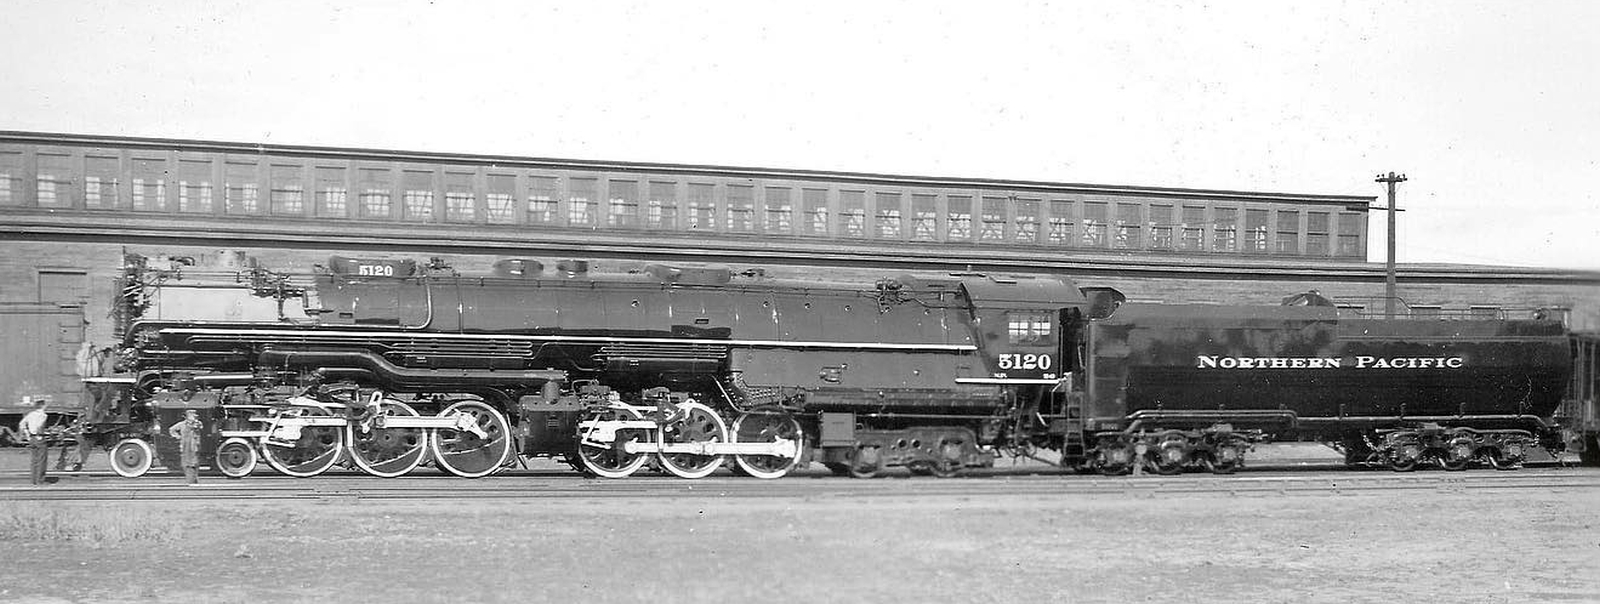 Still gleaming fresh from factory is Z-6 No. 5120 in th year 1937 in Duluth, Minnesota